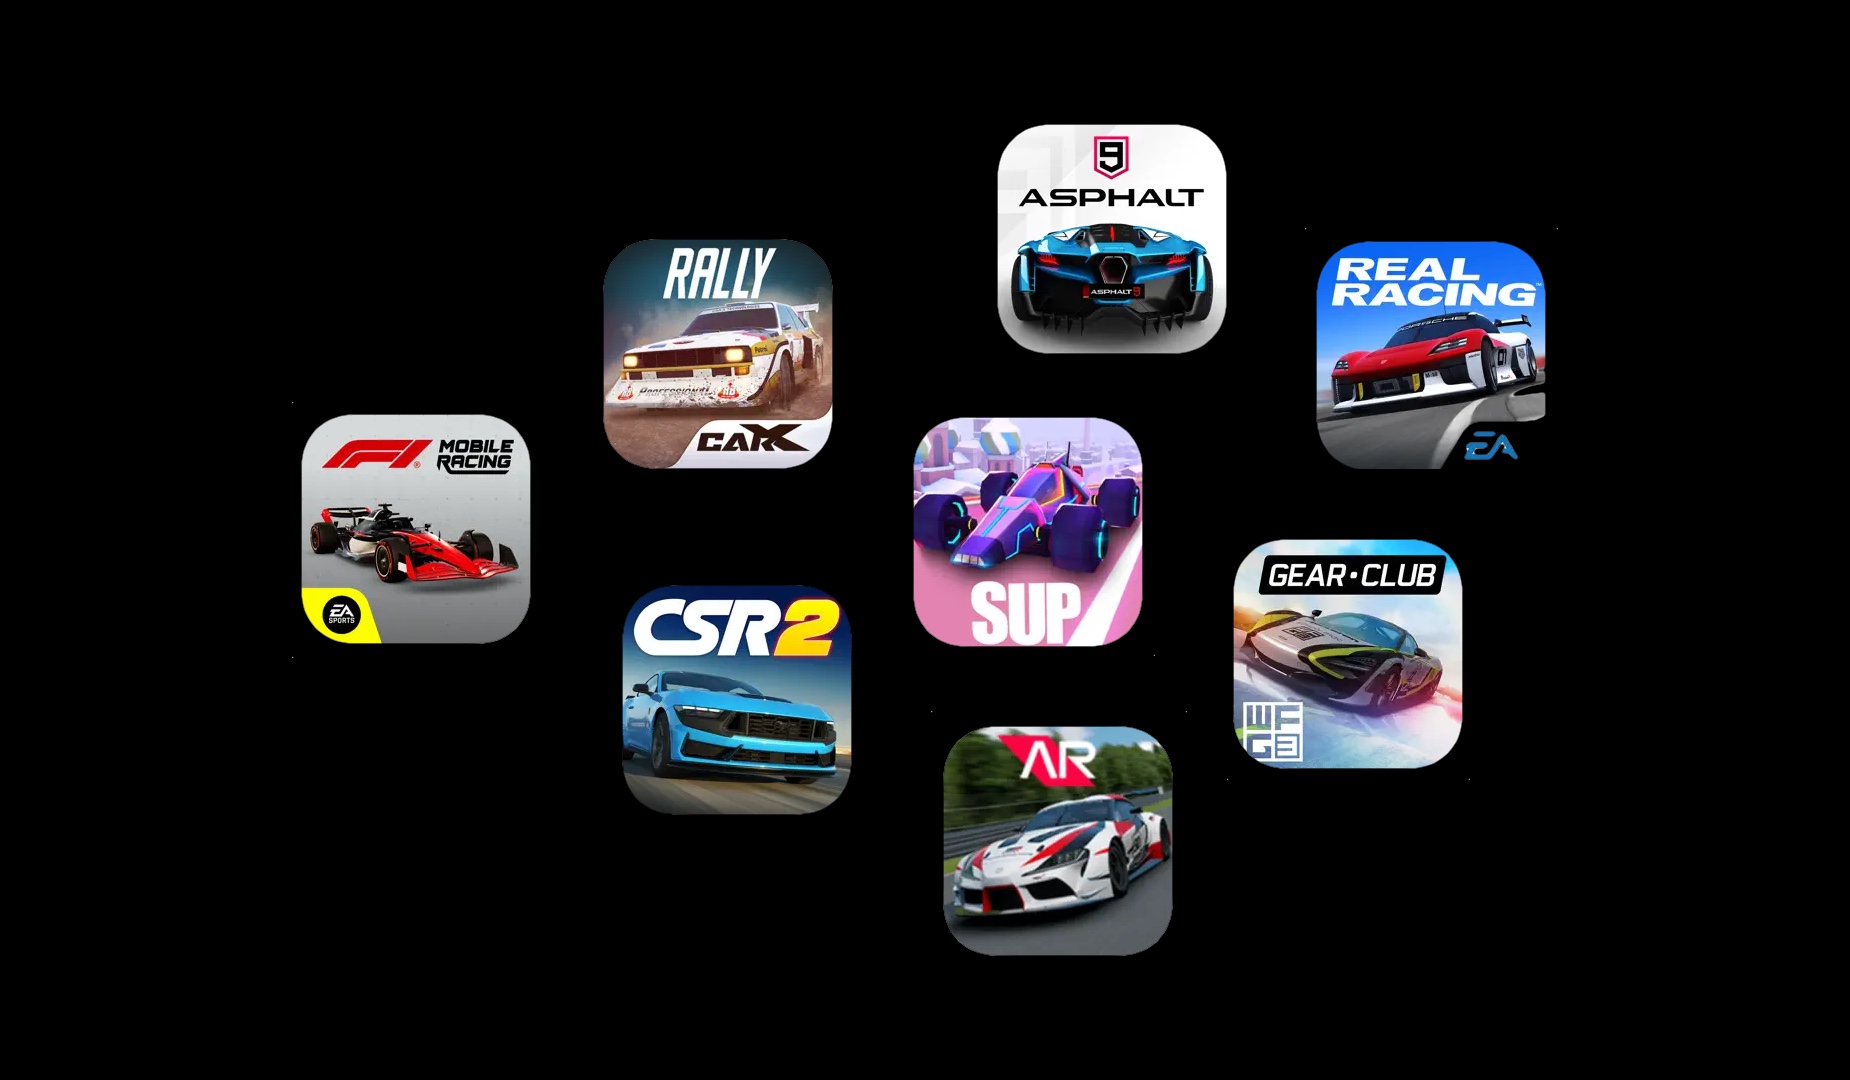 CarX Drift Racing 2 for iPhone - Download